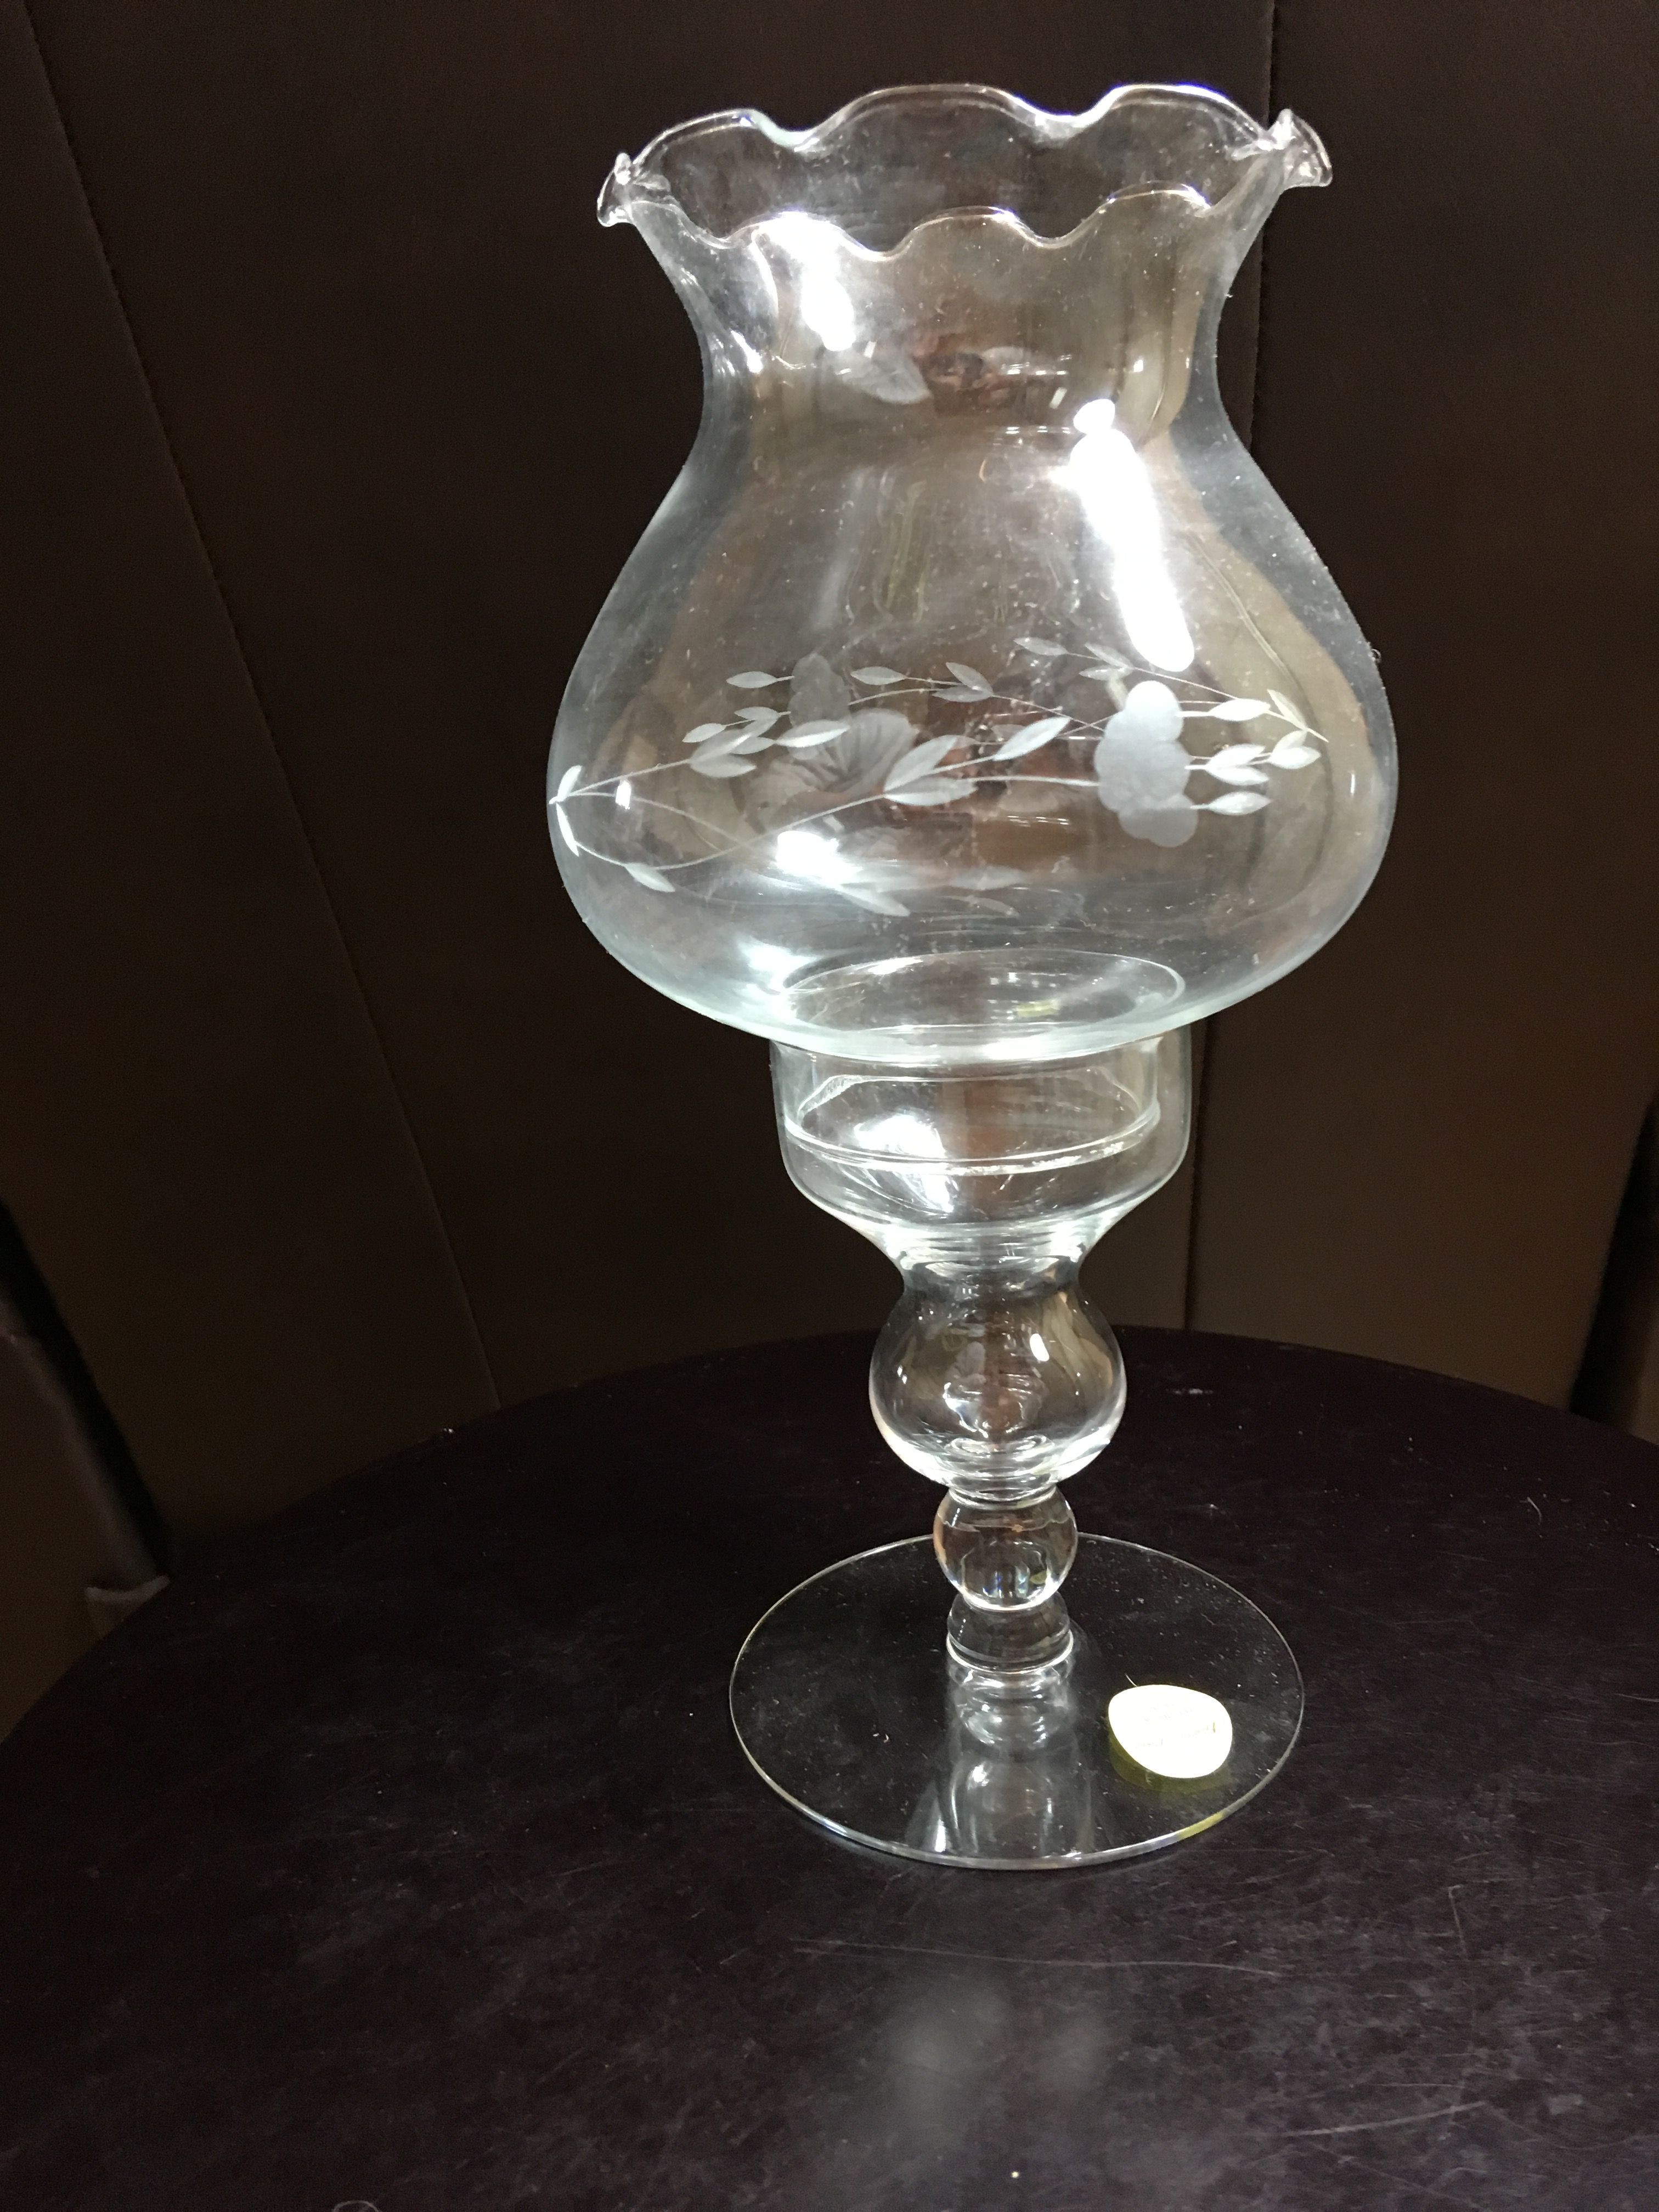 18 Ideal 6 Inch Crystal Vase 2022 free download 6 inch crystal vase of princess house glass candle lamp in box candle lamp princess throughout princess house glass candle lamp holder still in box approx measures 9 25 inch overall height